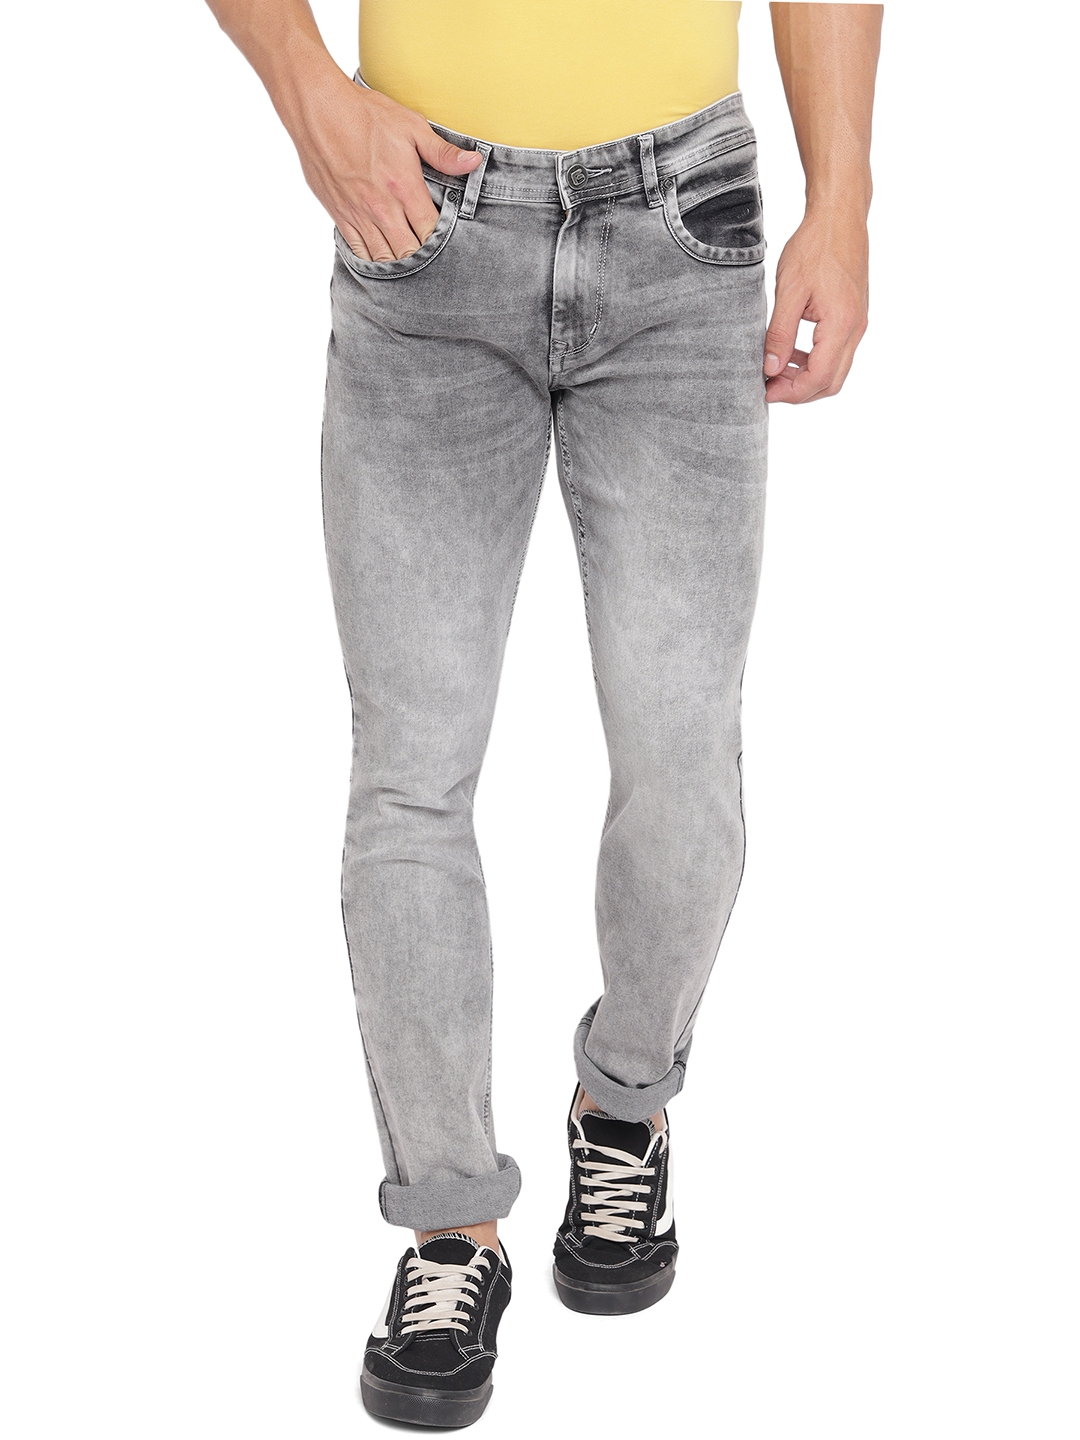 Greenfibre | Neutral Grey Washed Narrow Fit Jeans | Greenfibre